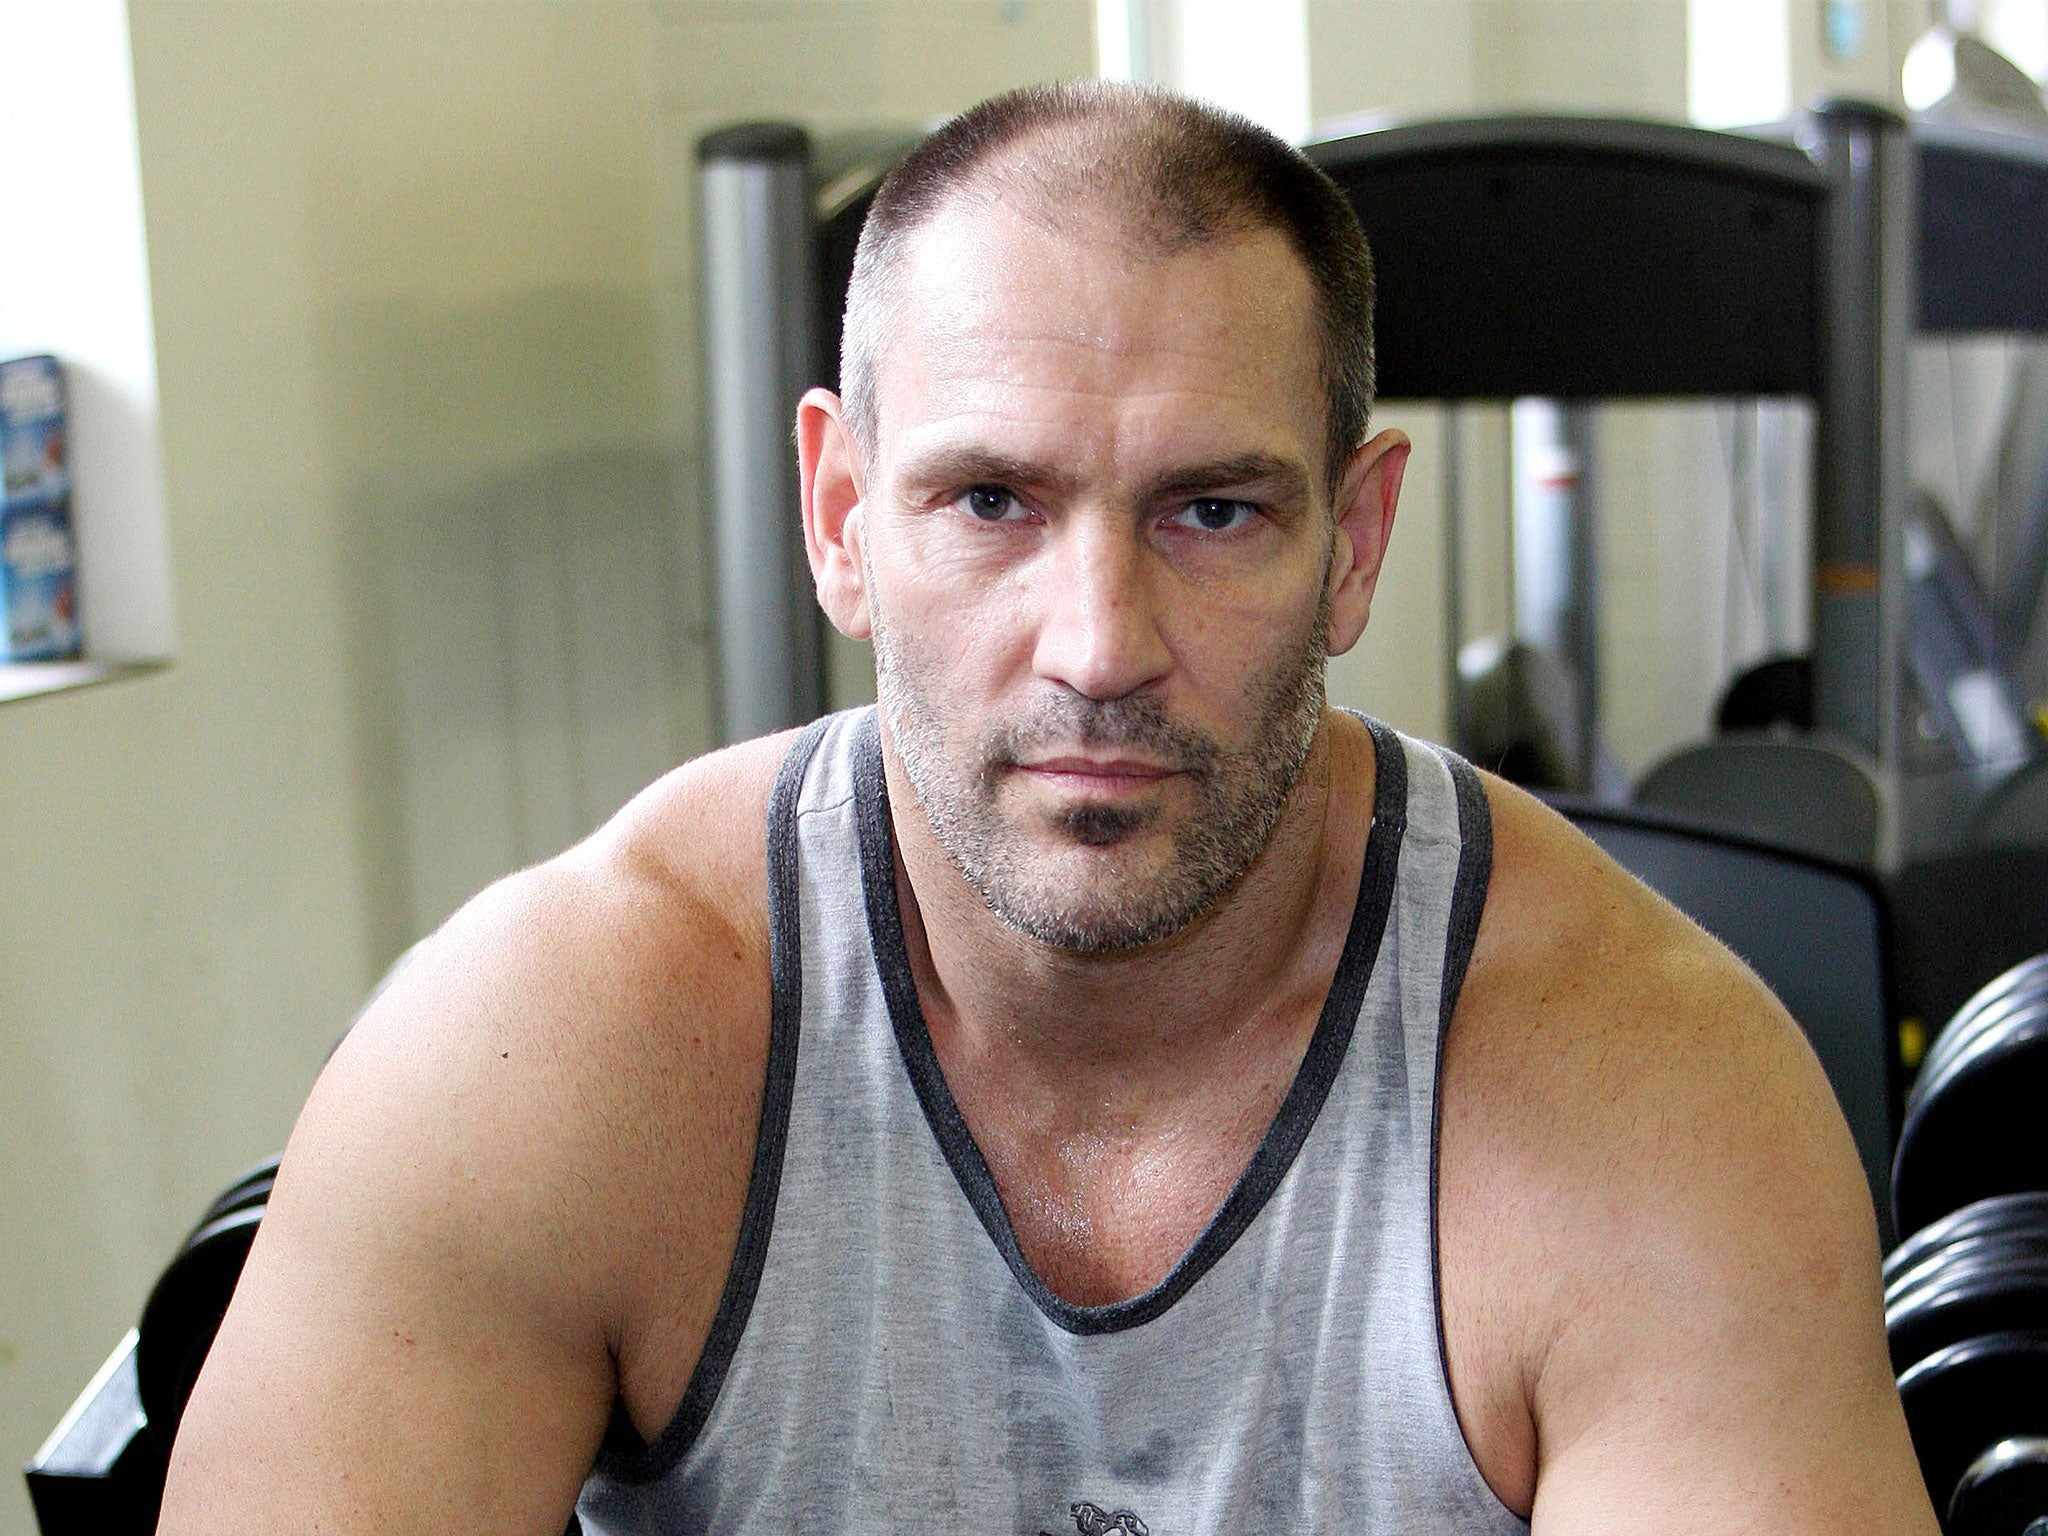 Dave Legeno pictured at the Moor Fitness Gym, Chesham, Buckinghamshire, Britain on 10 Aug 2009